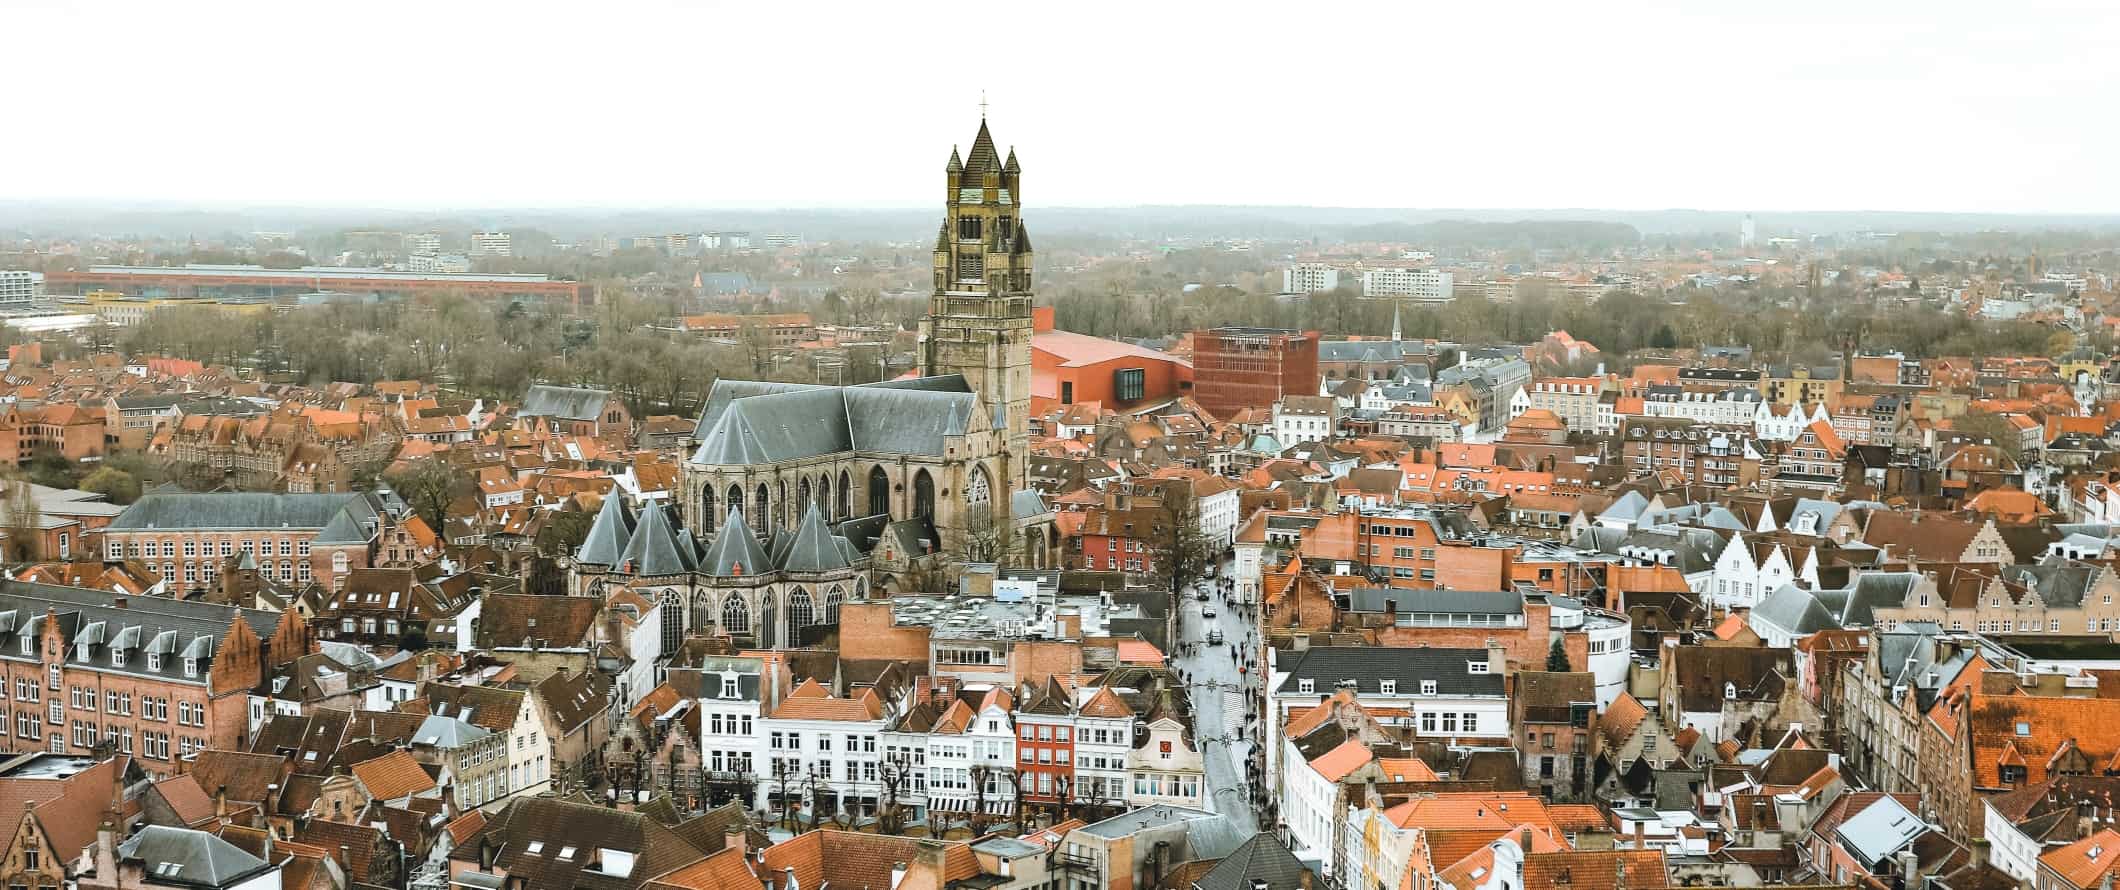 Panoramic view over the red rooftops of the historic center of Bruges with a large stone cathedral in the center, in Belgium